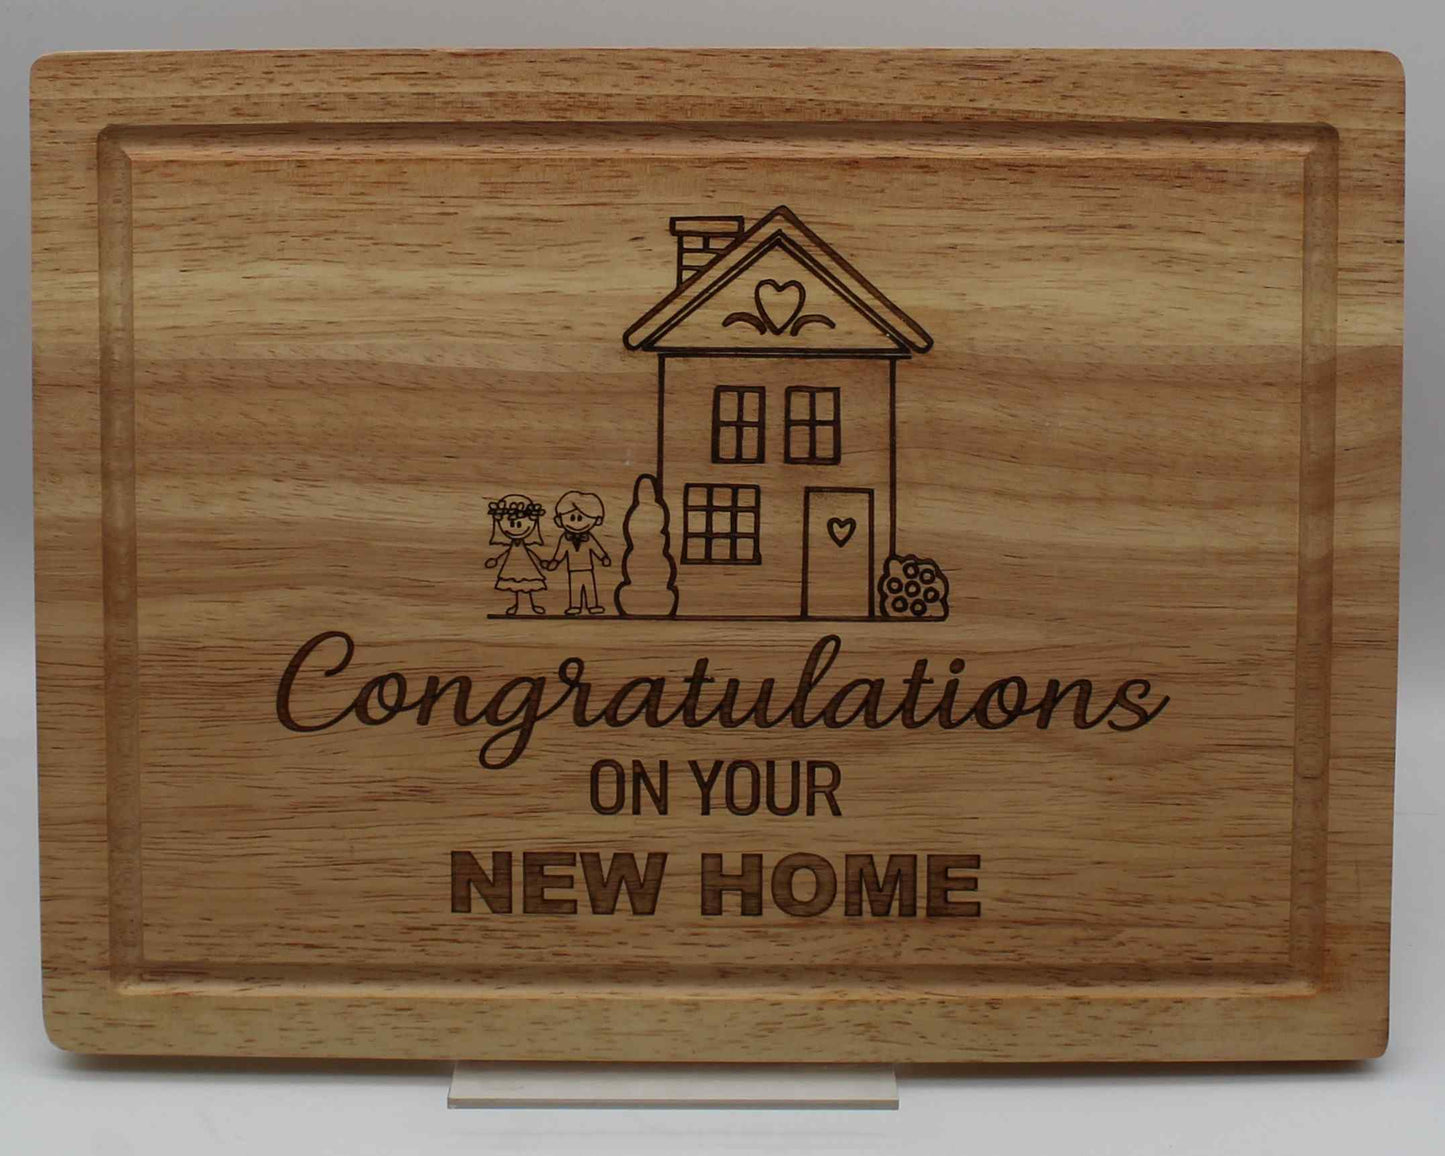 Home Chopping board - Congratulations On Your New Home